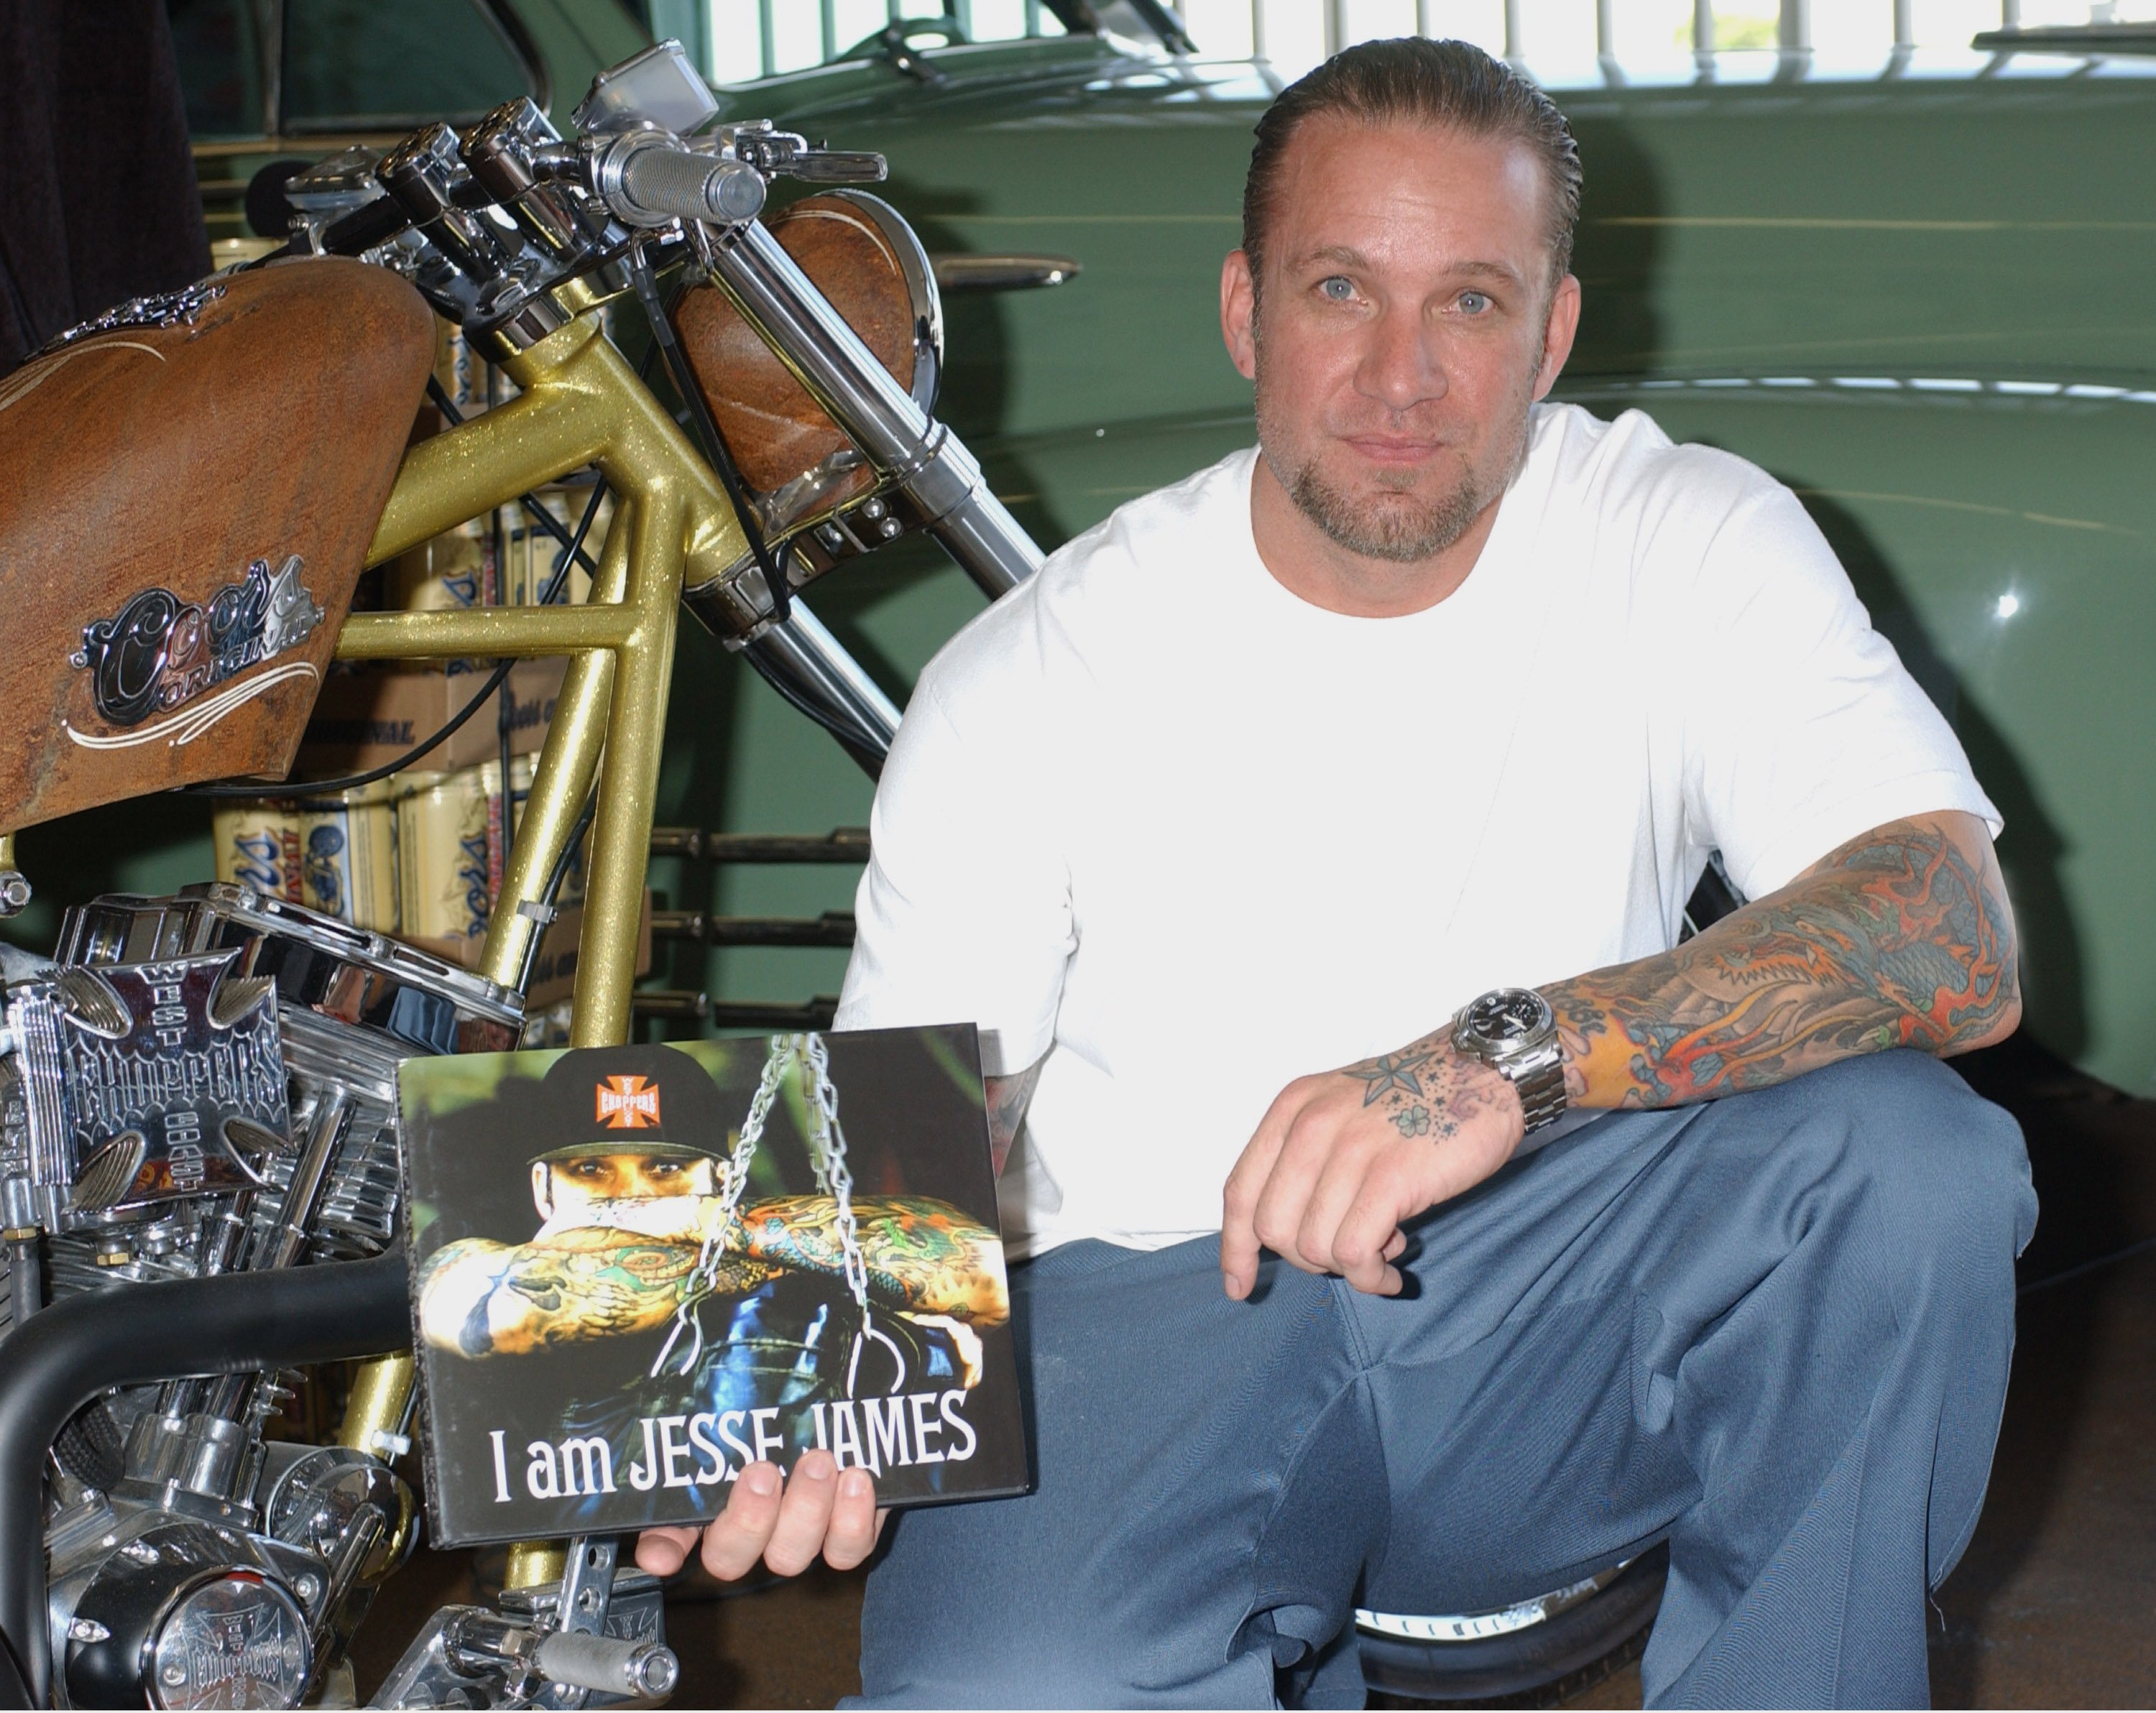 Jesse James during Book Signing for "I Am Jesse James" at West Coast Choppers Showroom in Long Beach, California. / Source: Getty Images